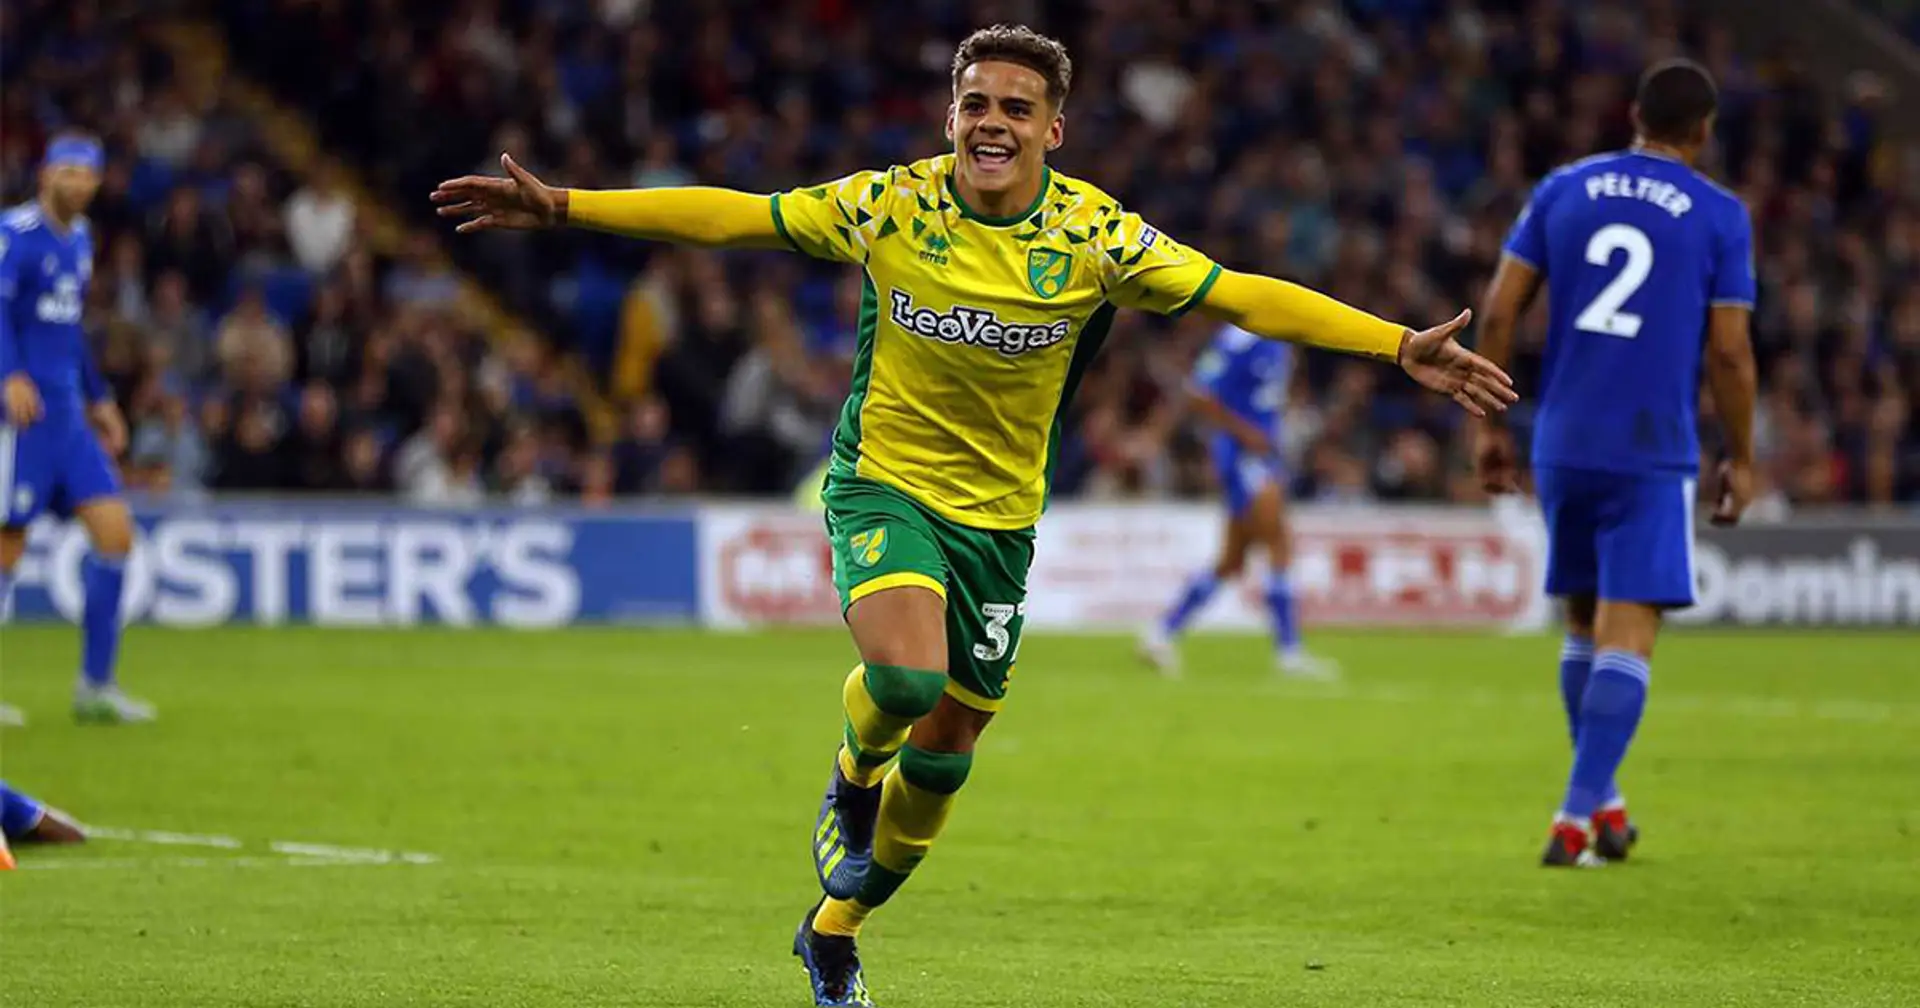 'It was amazing to be linked with the biggest club in the world': Norwich City's Max Aarons